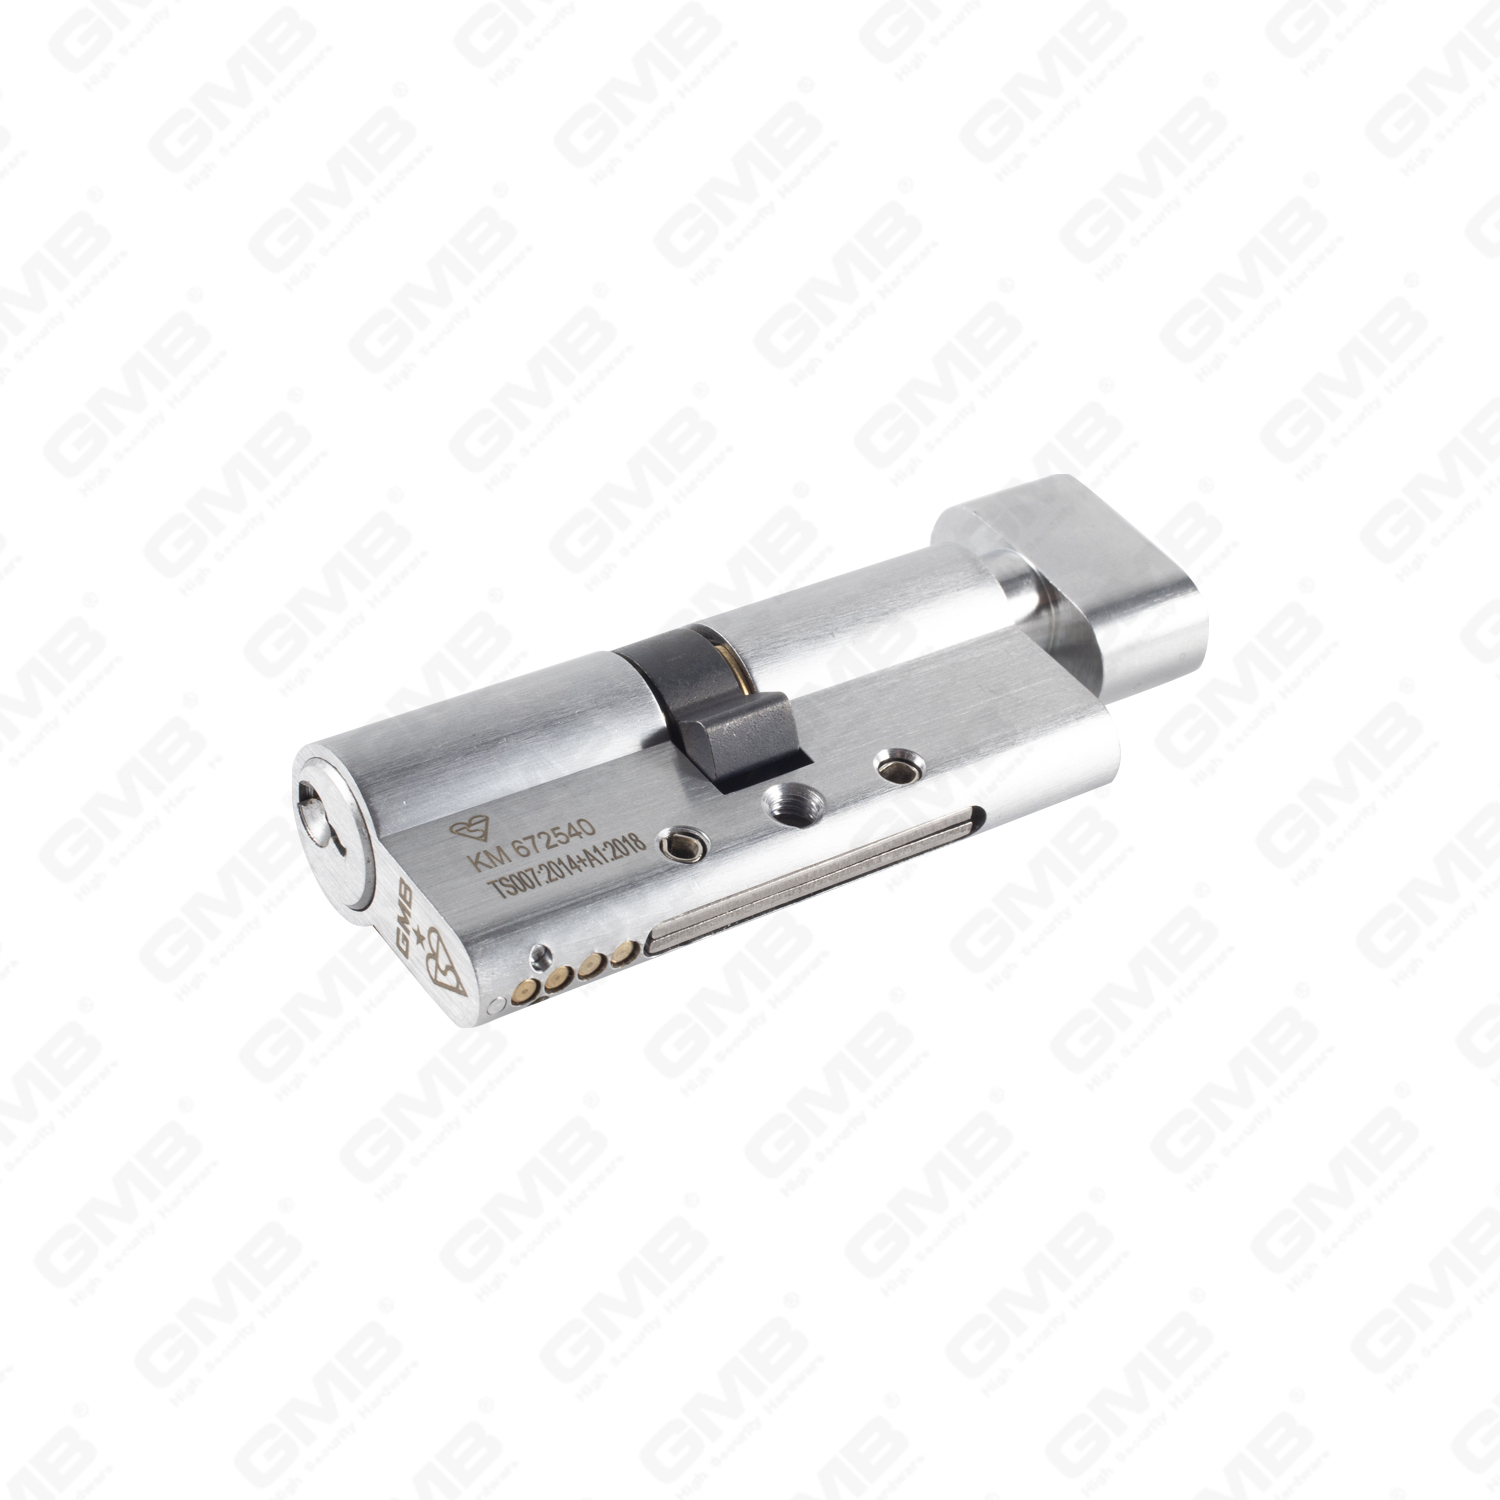 BSI High Security Cylinder Best High Security Cylinder_672540 with Turn Knob